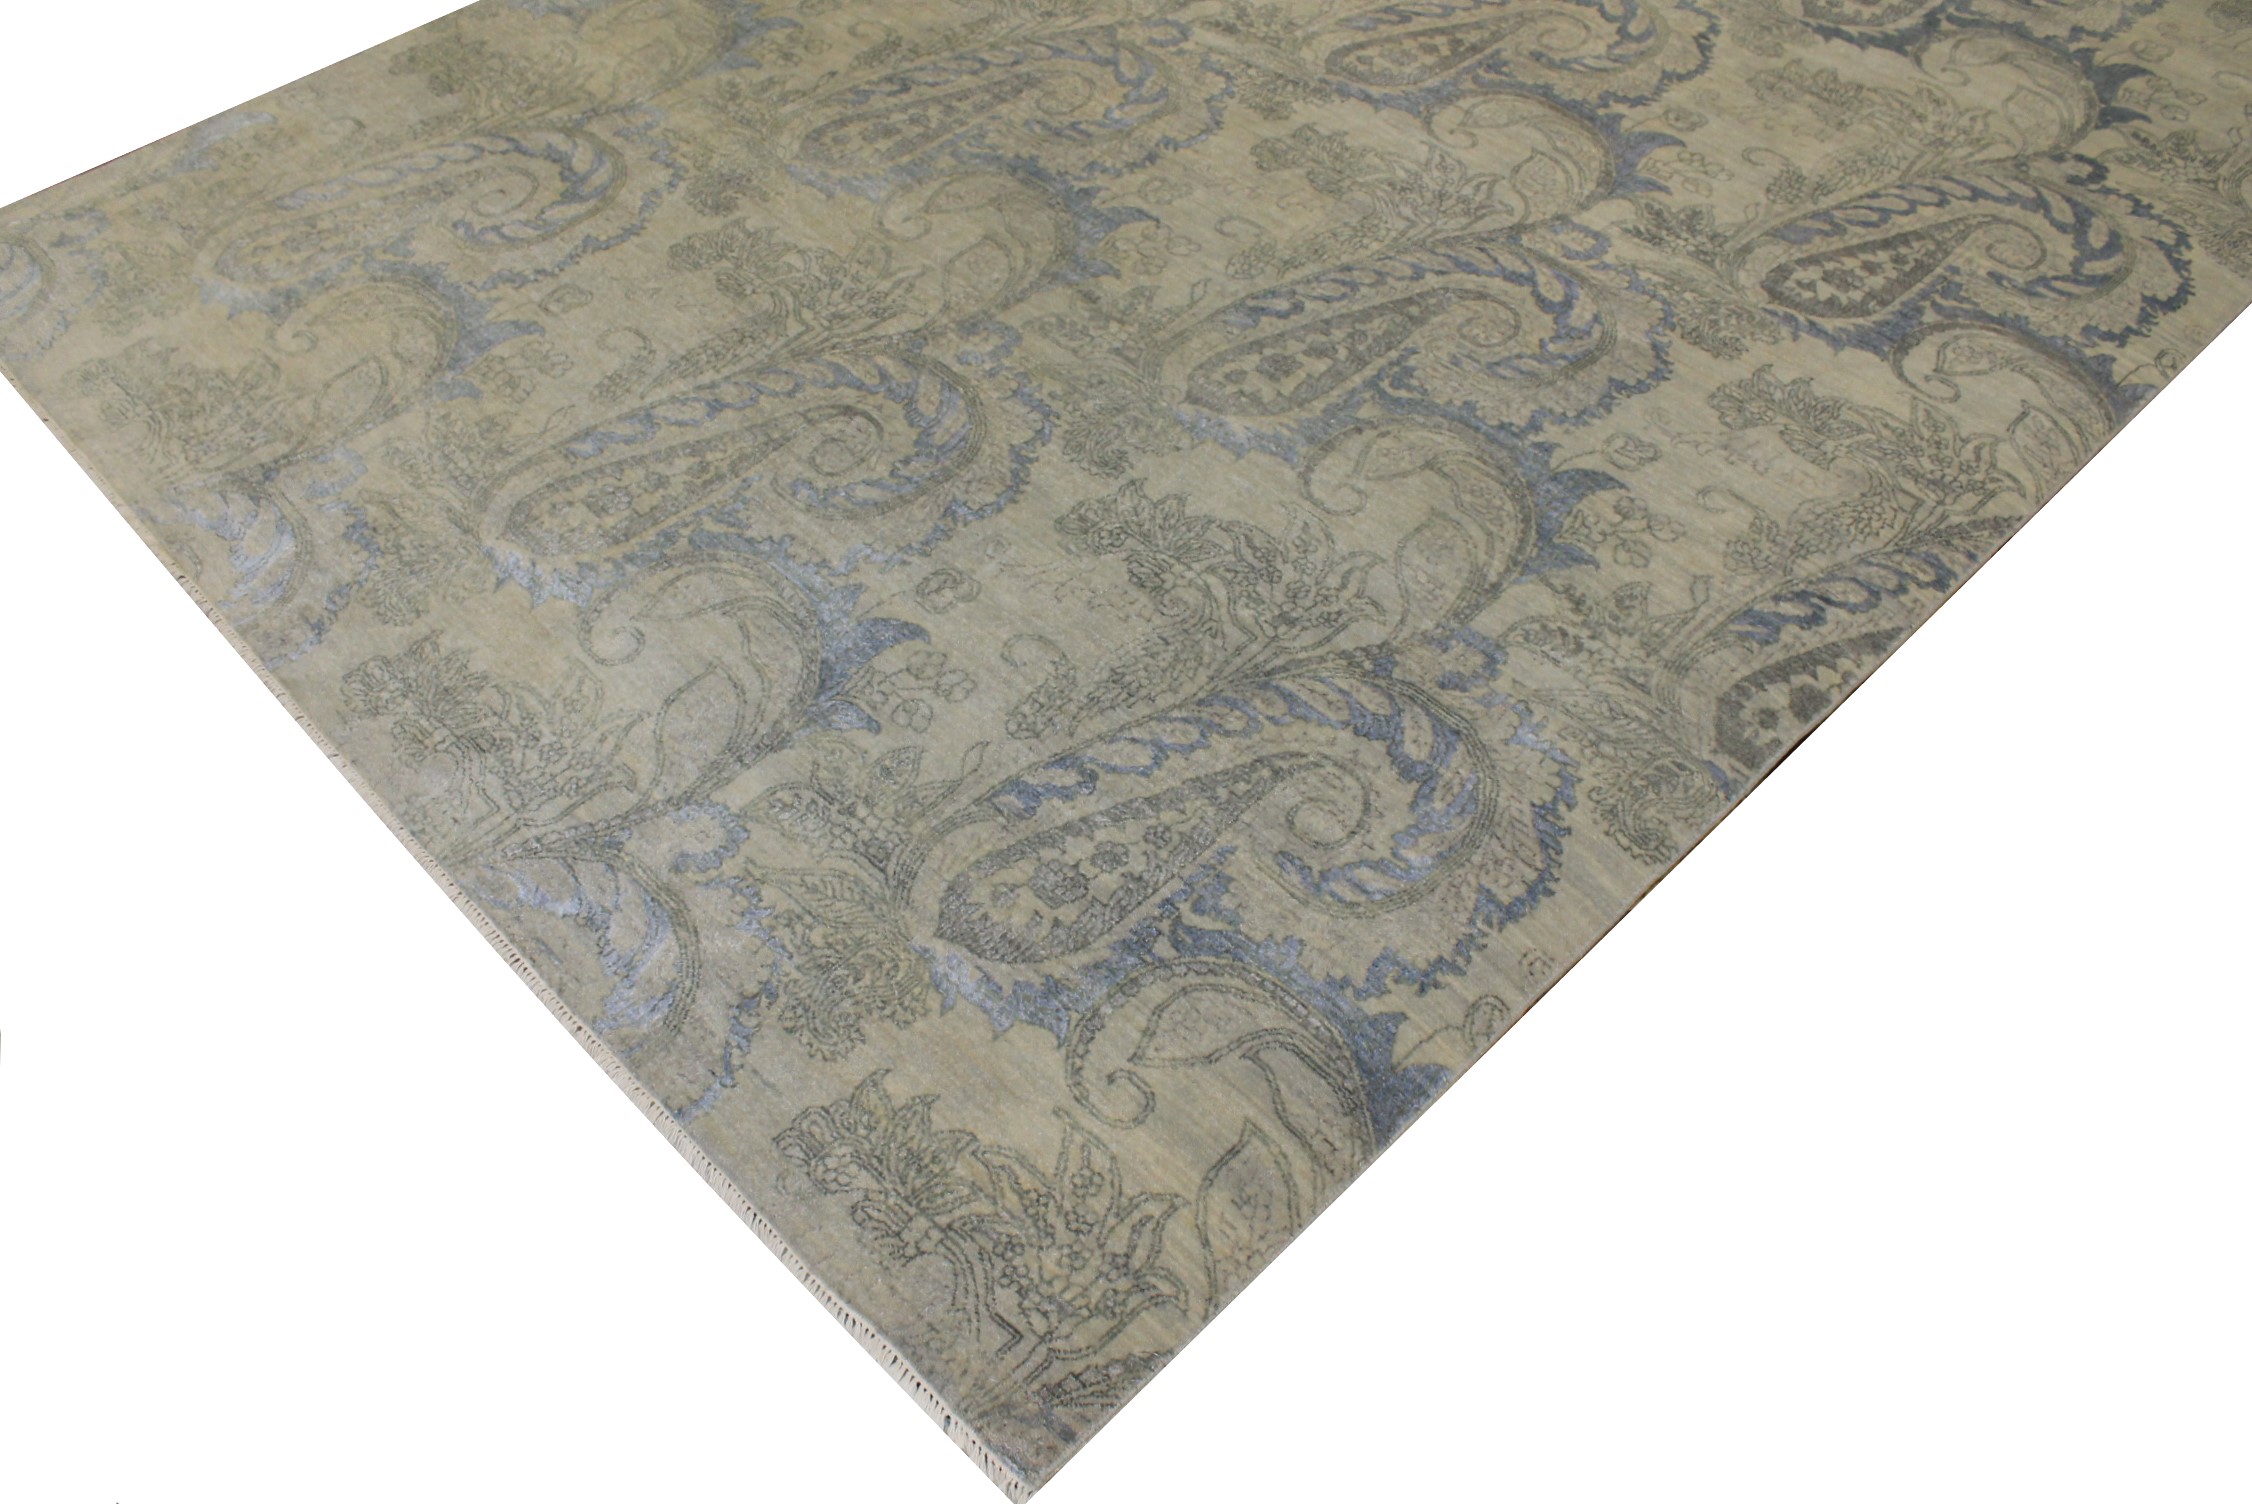 9x12 Contemporary Hand Knotted Wool Area Rug - MR17419